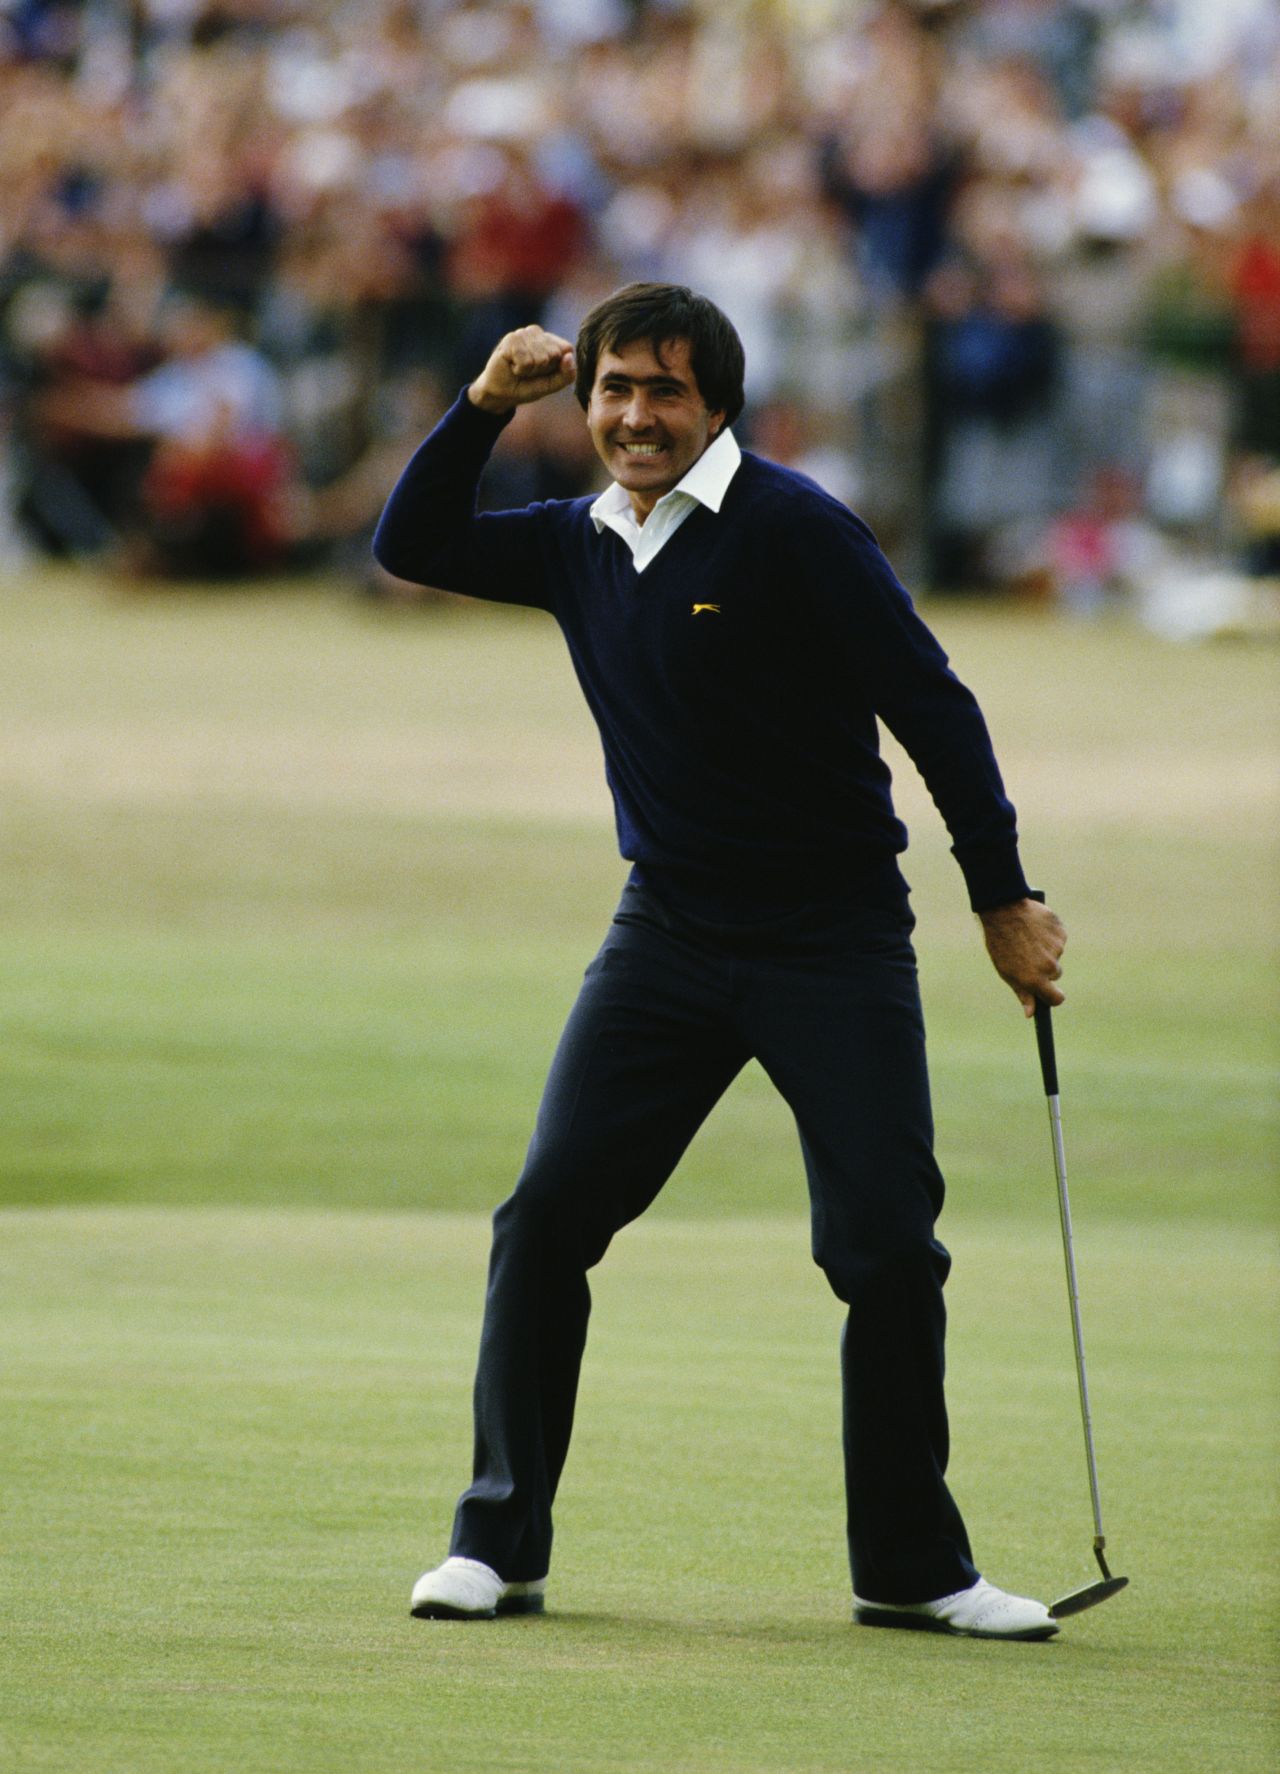 Seve Ballesteros holes his final putt to win the 1984 British Open on the Old Course at St. Andrews, Scotland. "If I had to choose a moment in my 100 majors that still sends shivers down my spine, every time I look at the picture, this would be it," Cannon reflected. "The roar of the crowd went on and on.<br /><br />"The British crowds and I adored Seve," Cannon said of the Spaniard, who won five majors before his death from brain cancer in May 2011. "He was, for sure, the catalyst for the growth of European golf and all that we have witnessed in the past 30 years.<br />"I miss him every day, and to think this moment was captured 30 years ago this year -- it just seems like yesterday."